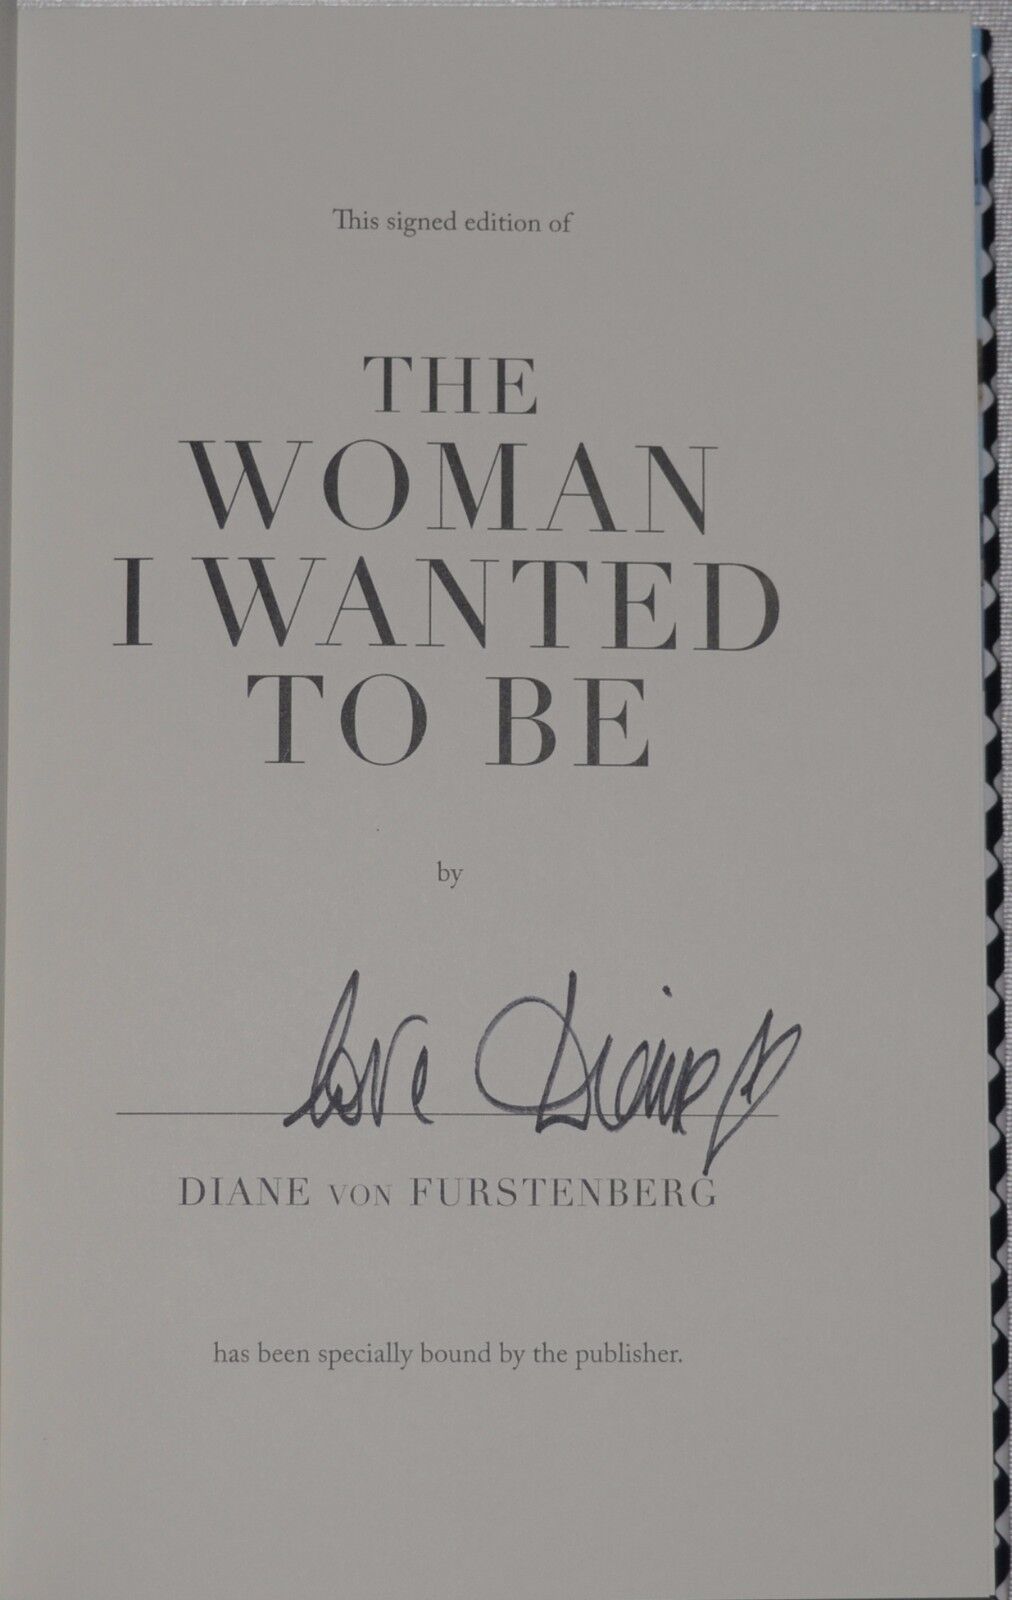 Diane Von Furstenberg 2x Signed Book The Woman I Wanted To Be Rare Error